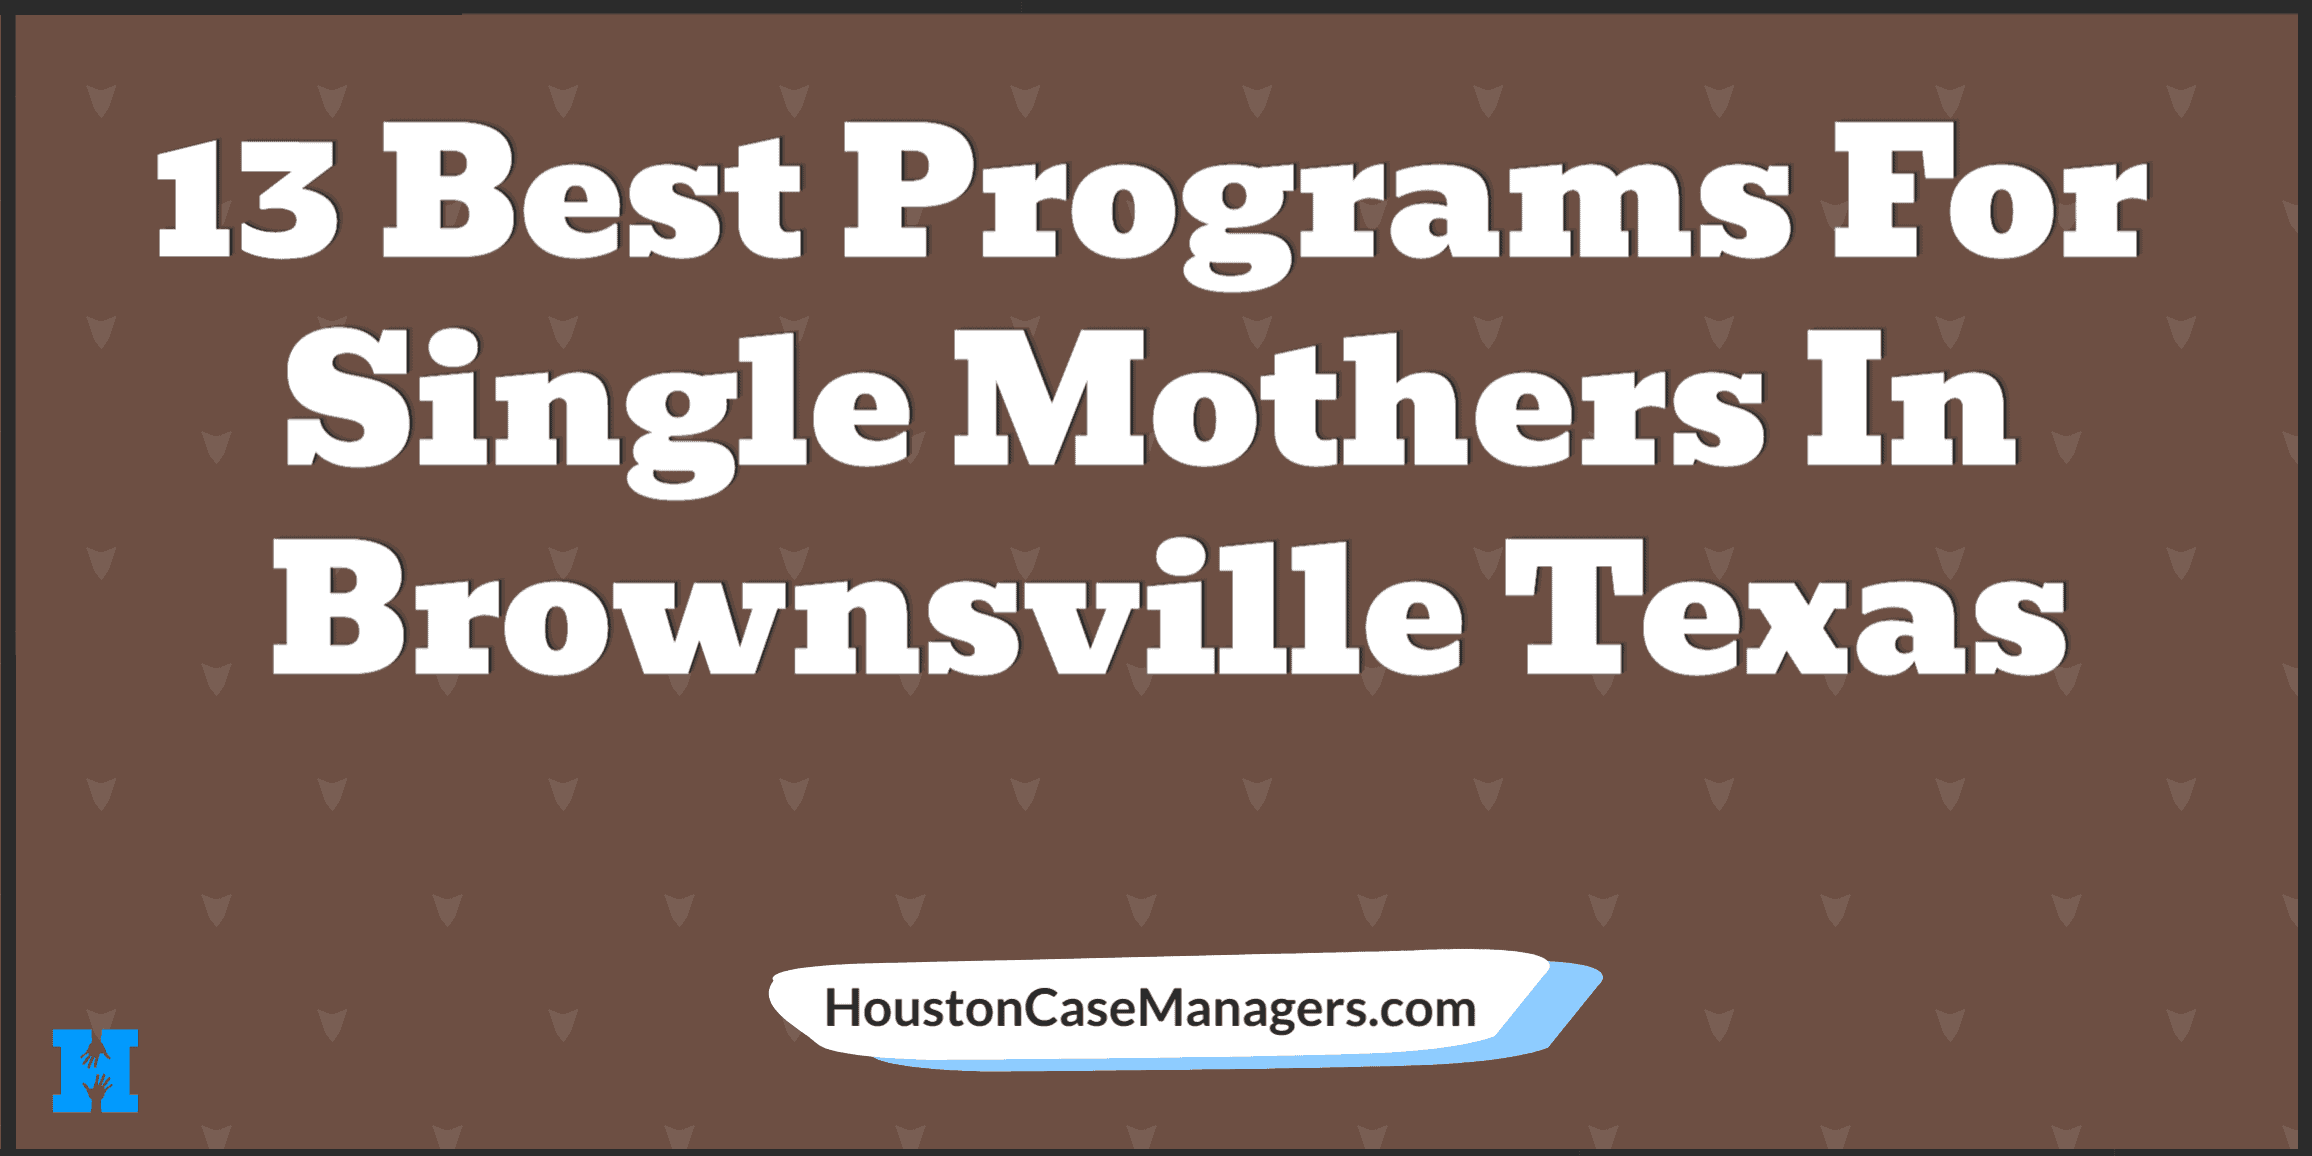 single mothers brownsville tx